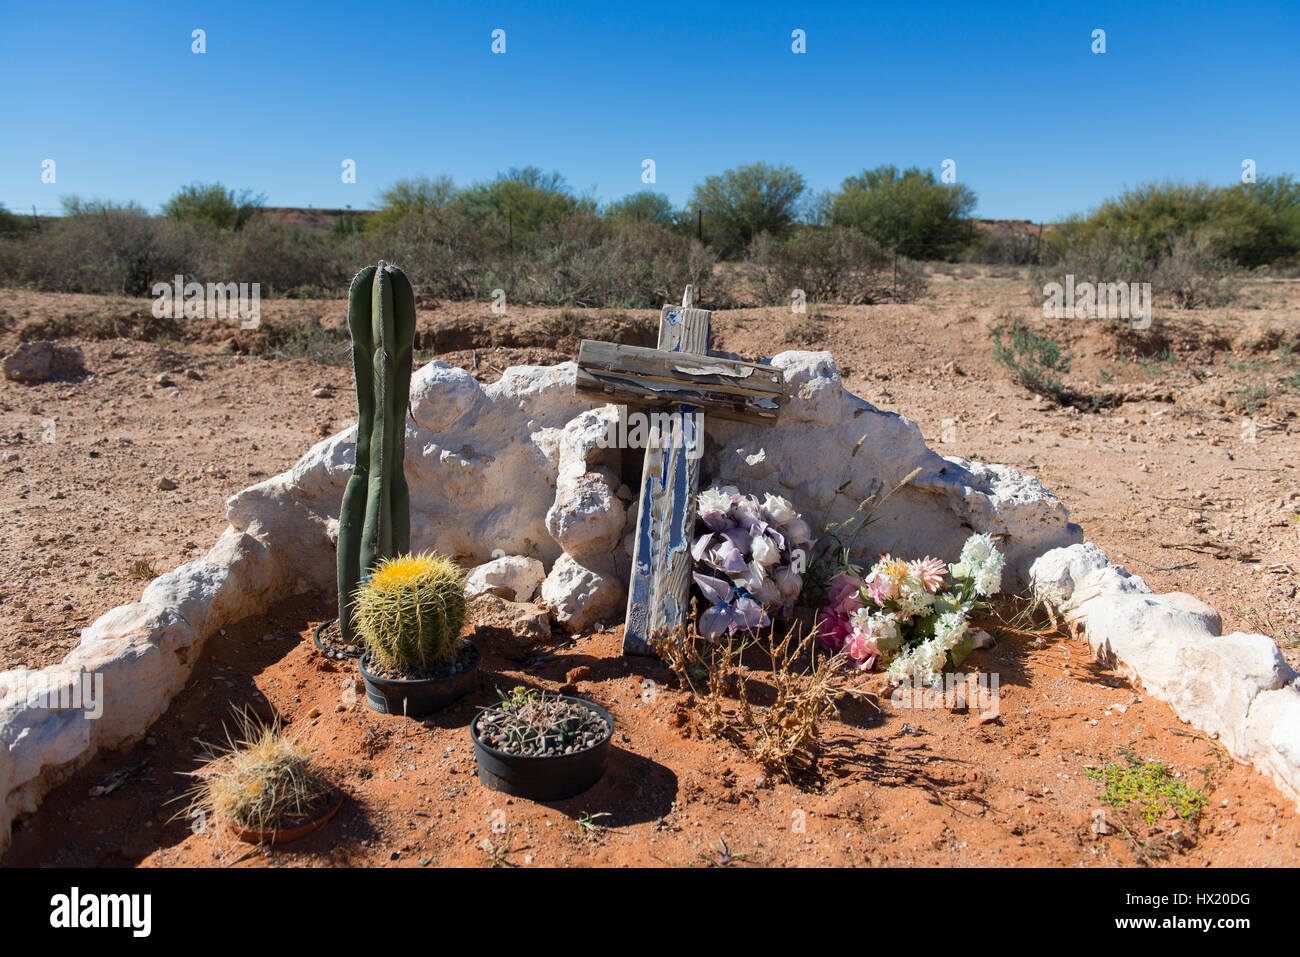 Grave of a traffic casualty on gravel road C 15 in  the Kalahari desert, Namibia Stock Photo